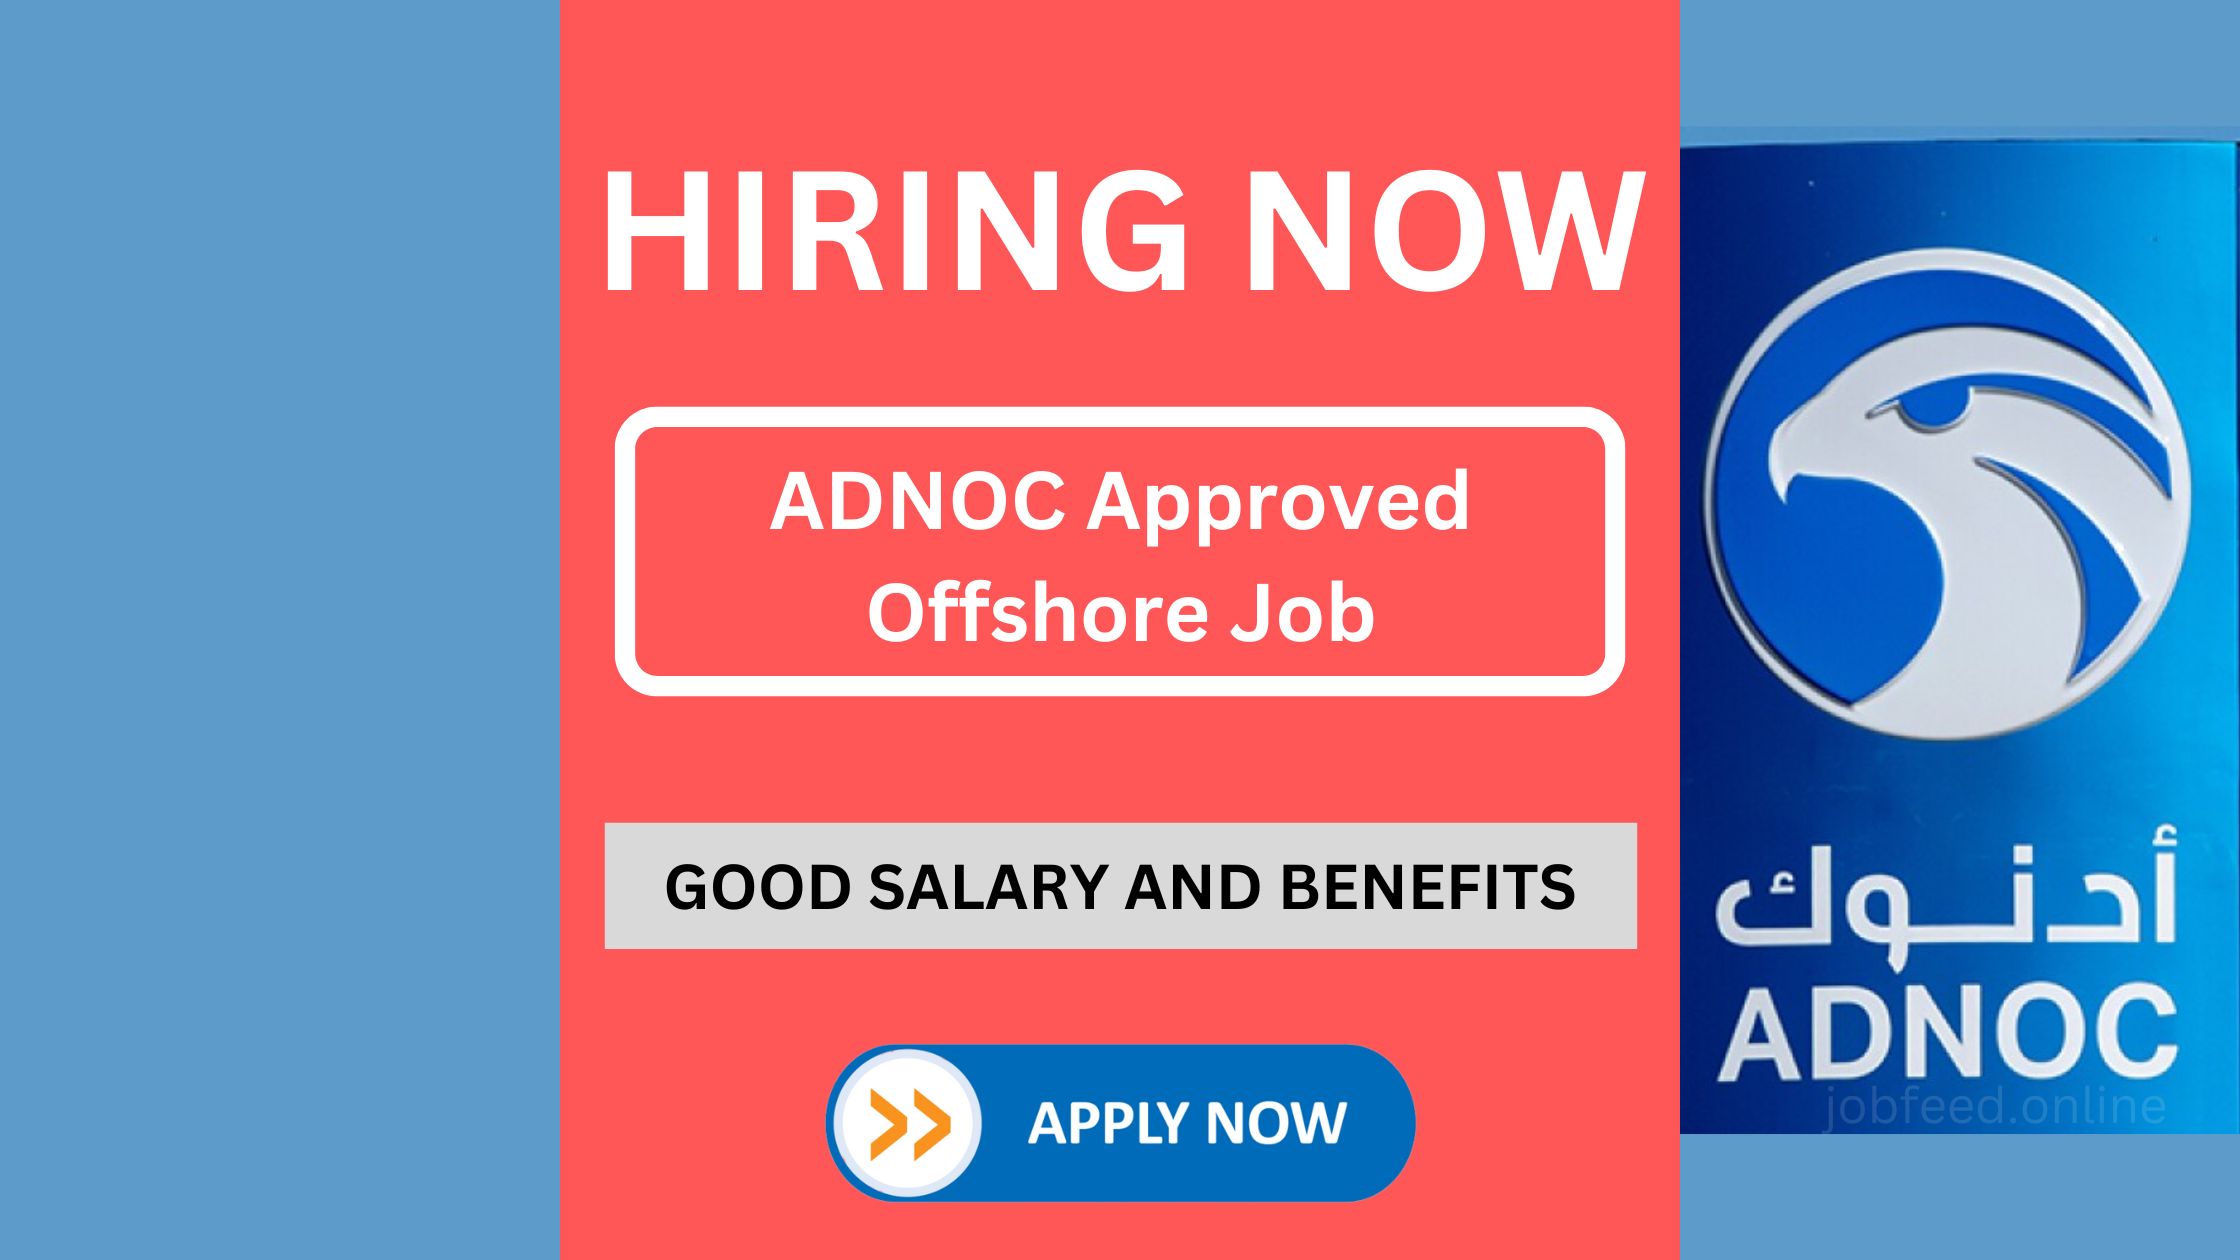 ADNOC Approved Offshore Job Vacancy - HSE Officer